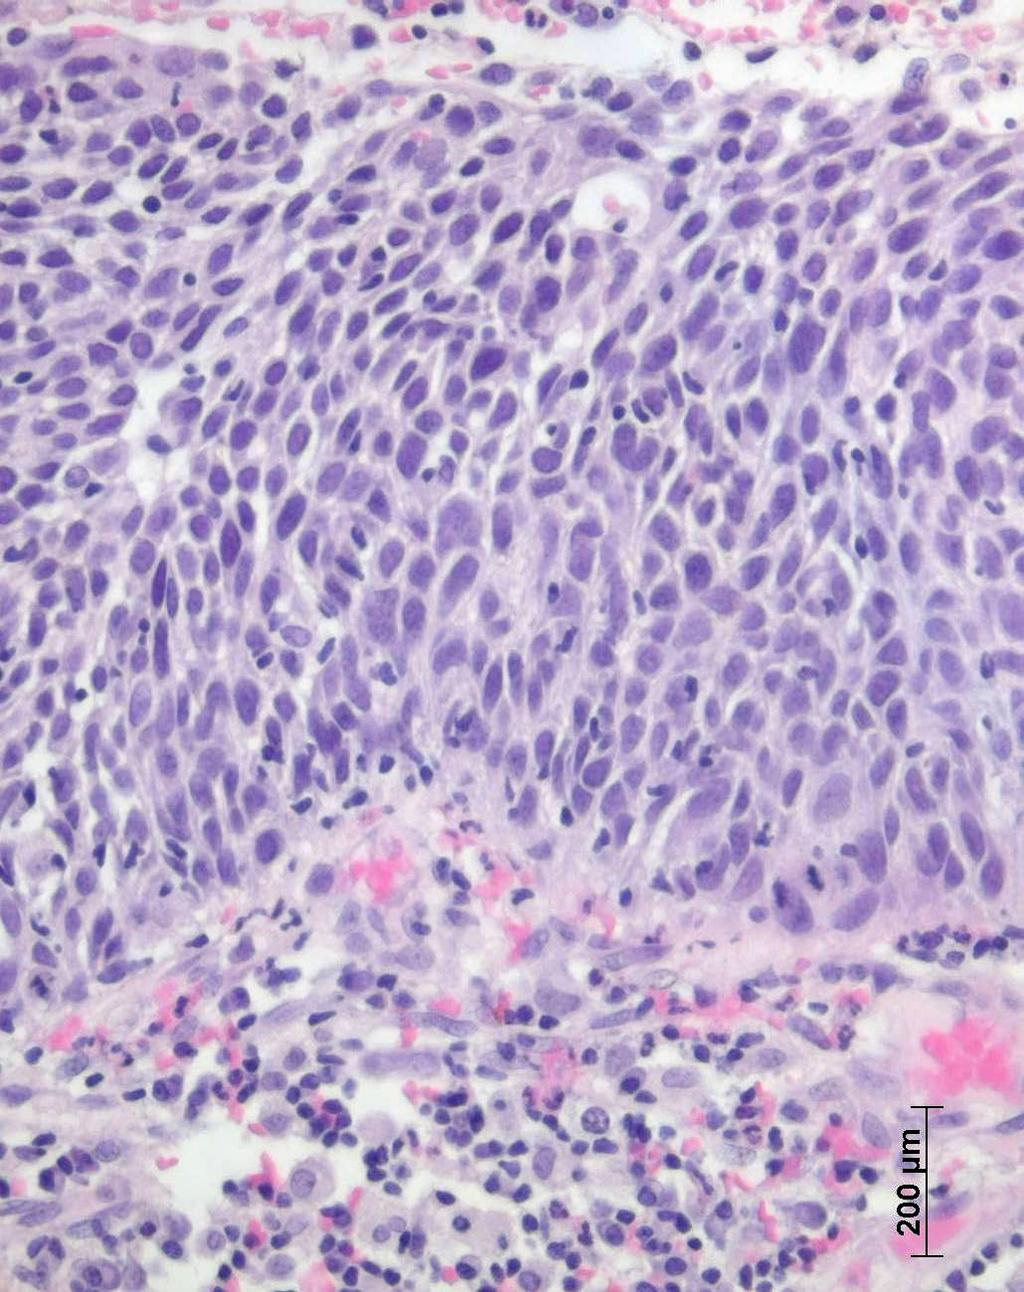 papillary fronds (PF), magnification 400X. N Figure 3.4: H&E of Carcinoma in situ.